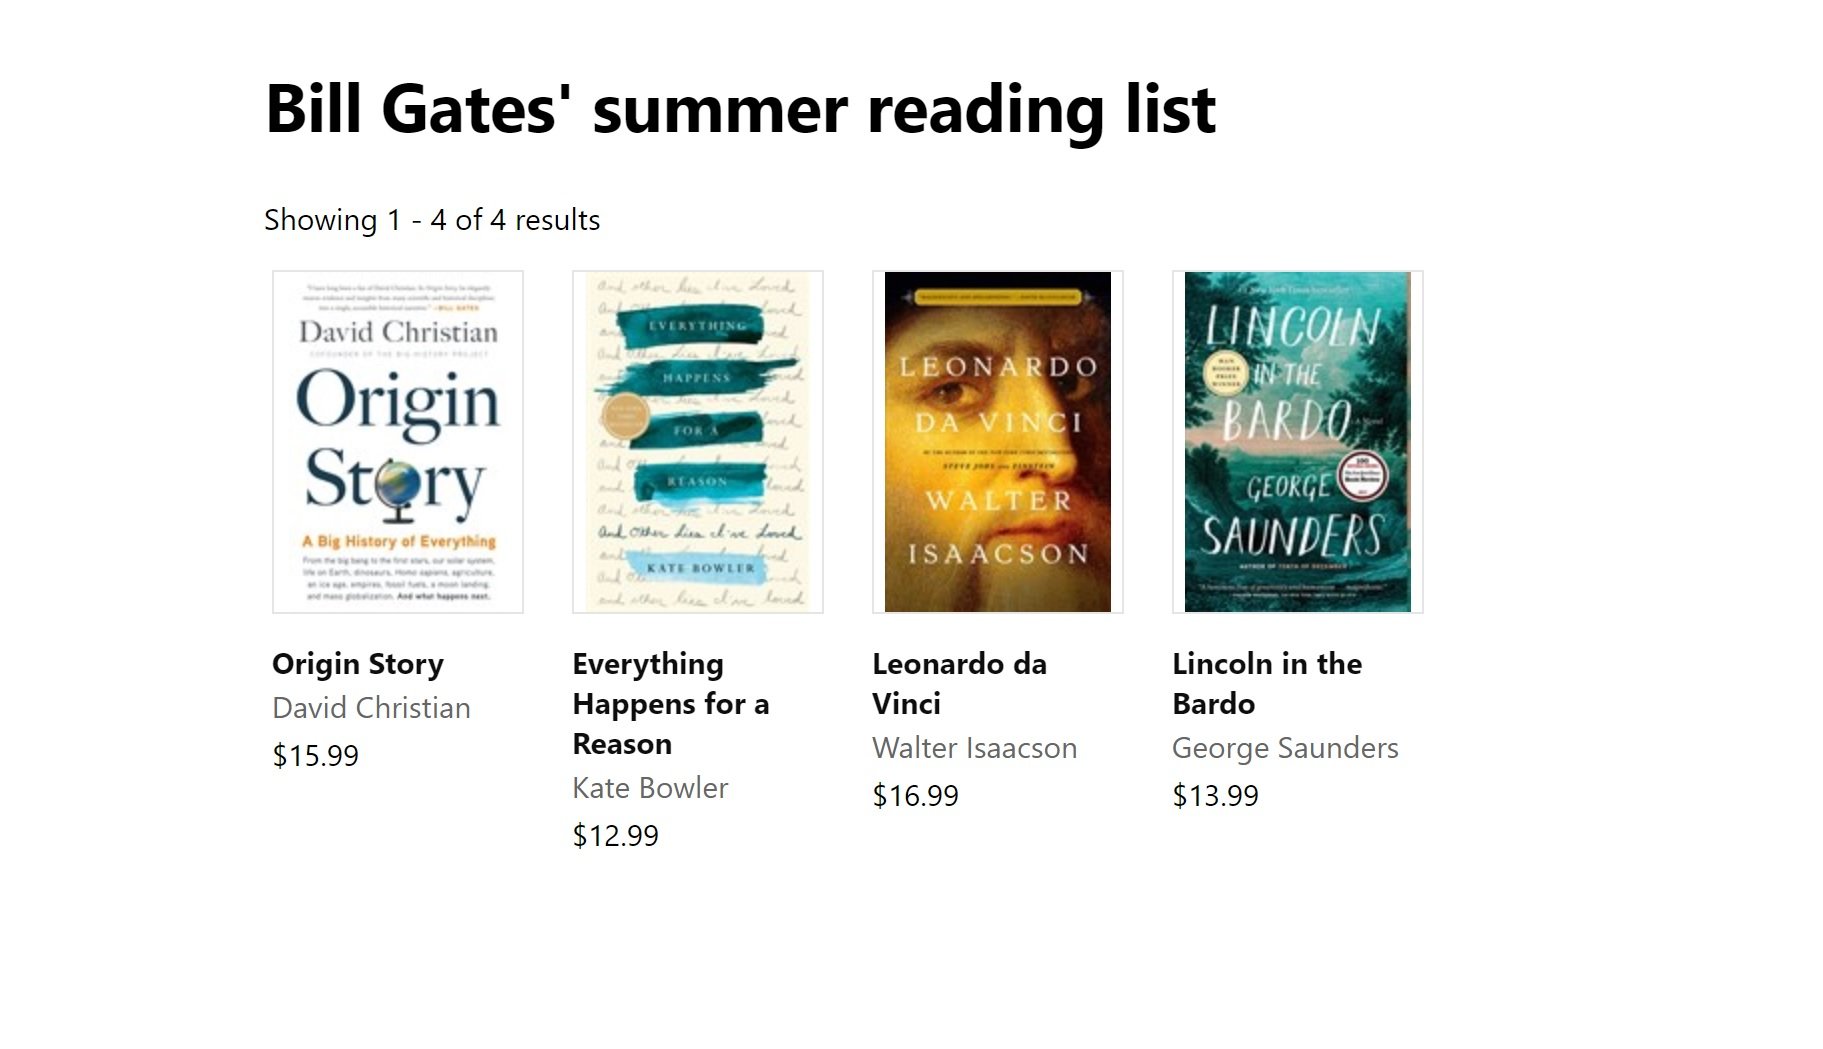 Check out Bill Gates' summer reading list on the Microsoft Store